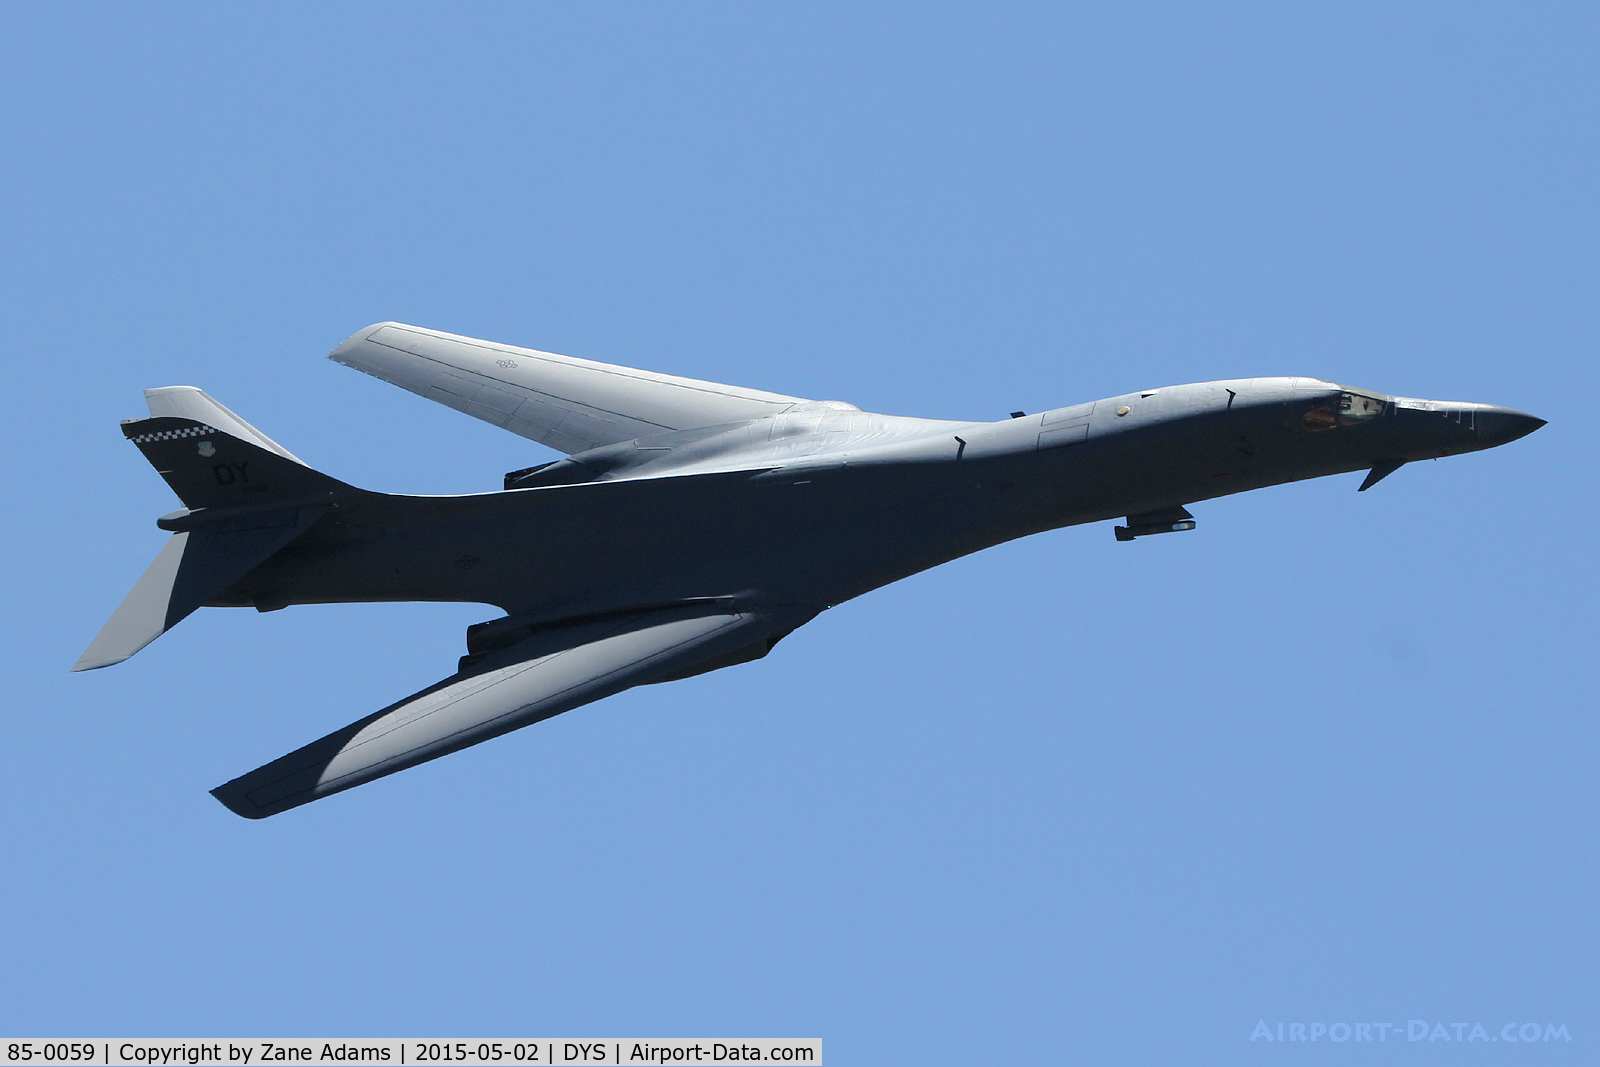 85-0059, 1985 Rockwell B-1B Lancer C/N 19, At the 2014 Big Country Airshow - Dyess AFB, TX